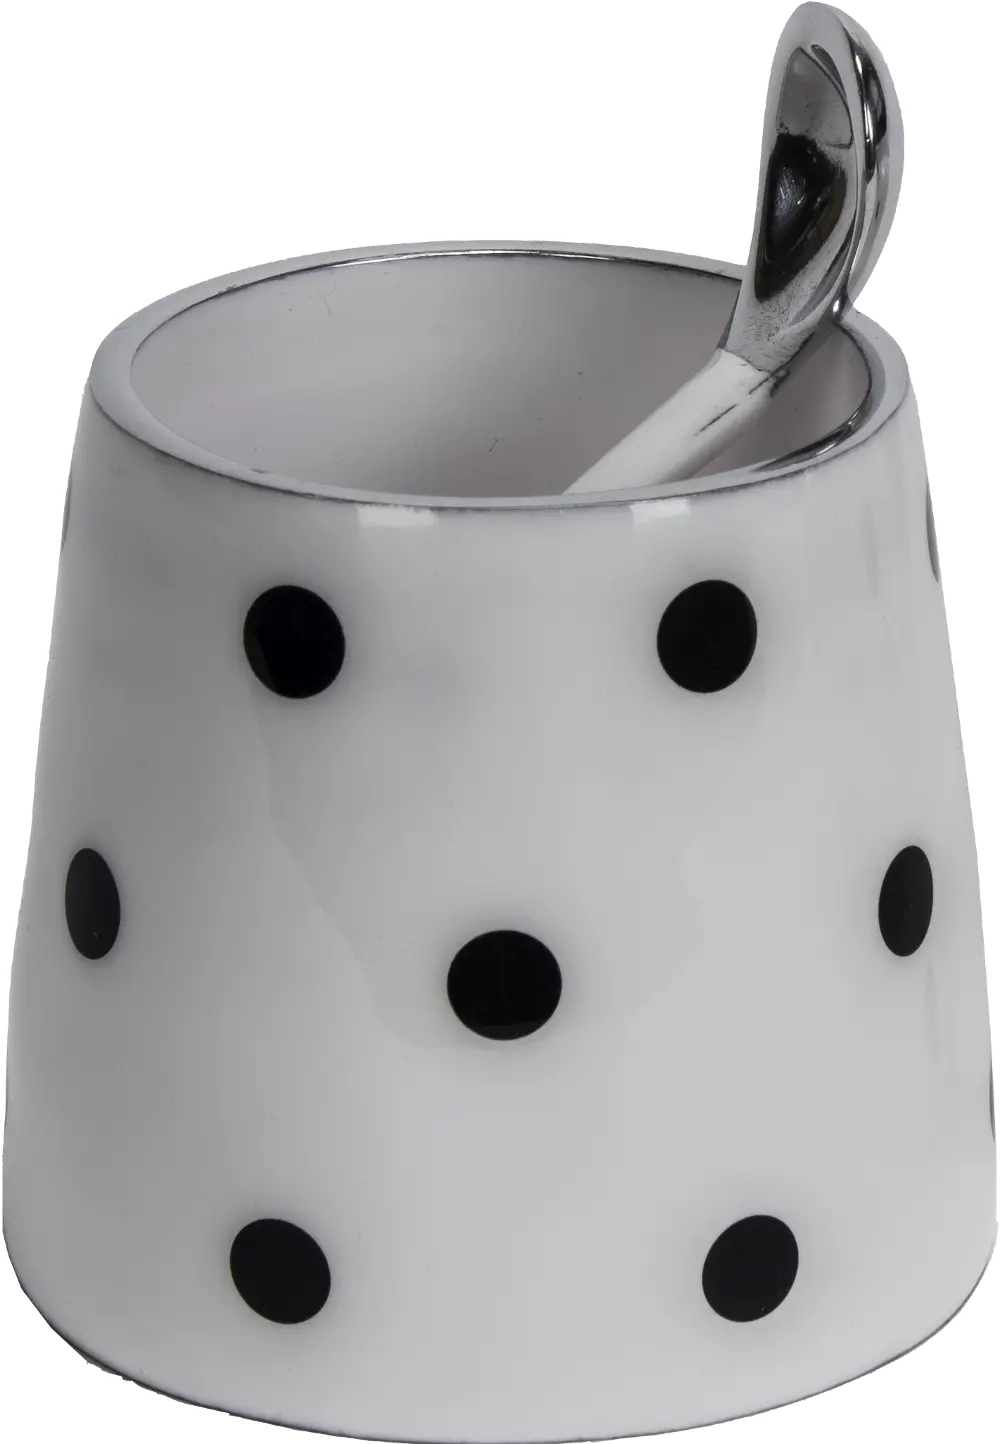 Aluminum Sugar Pot and Spoon with a White Enamel Finish and Polka Dots-1